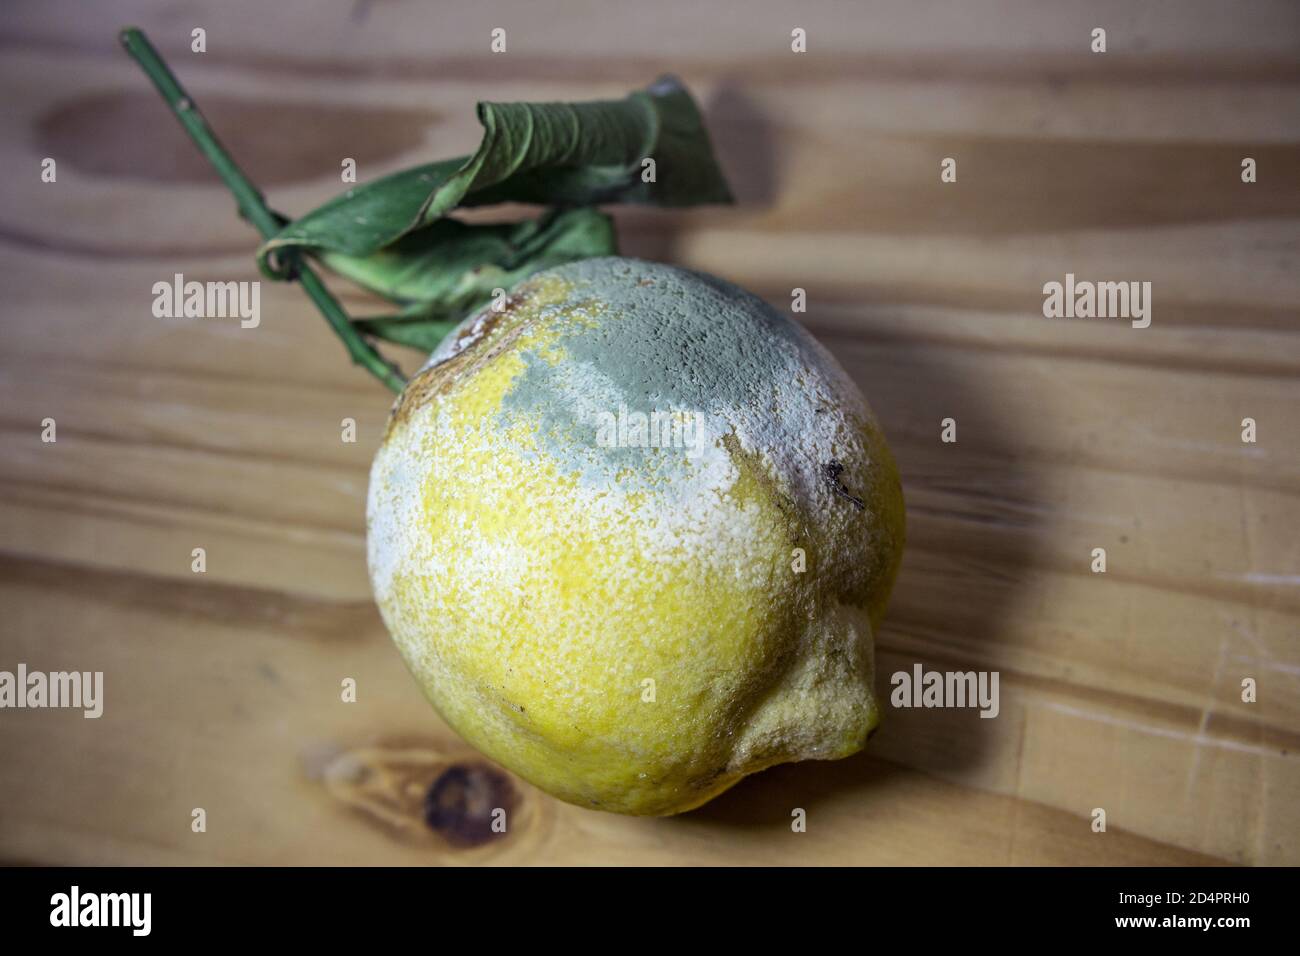 A lemon covered with mold resting on a wooden surface Stock Photo